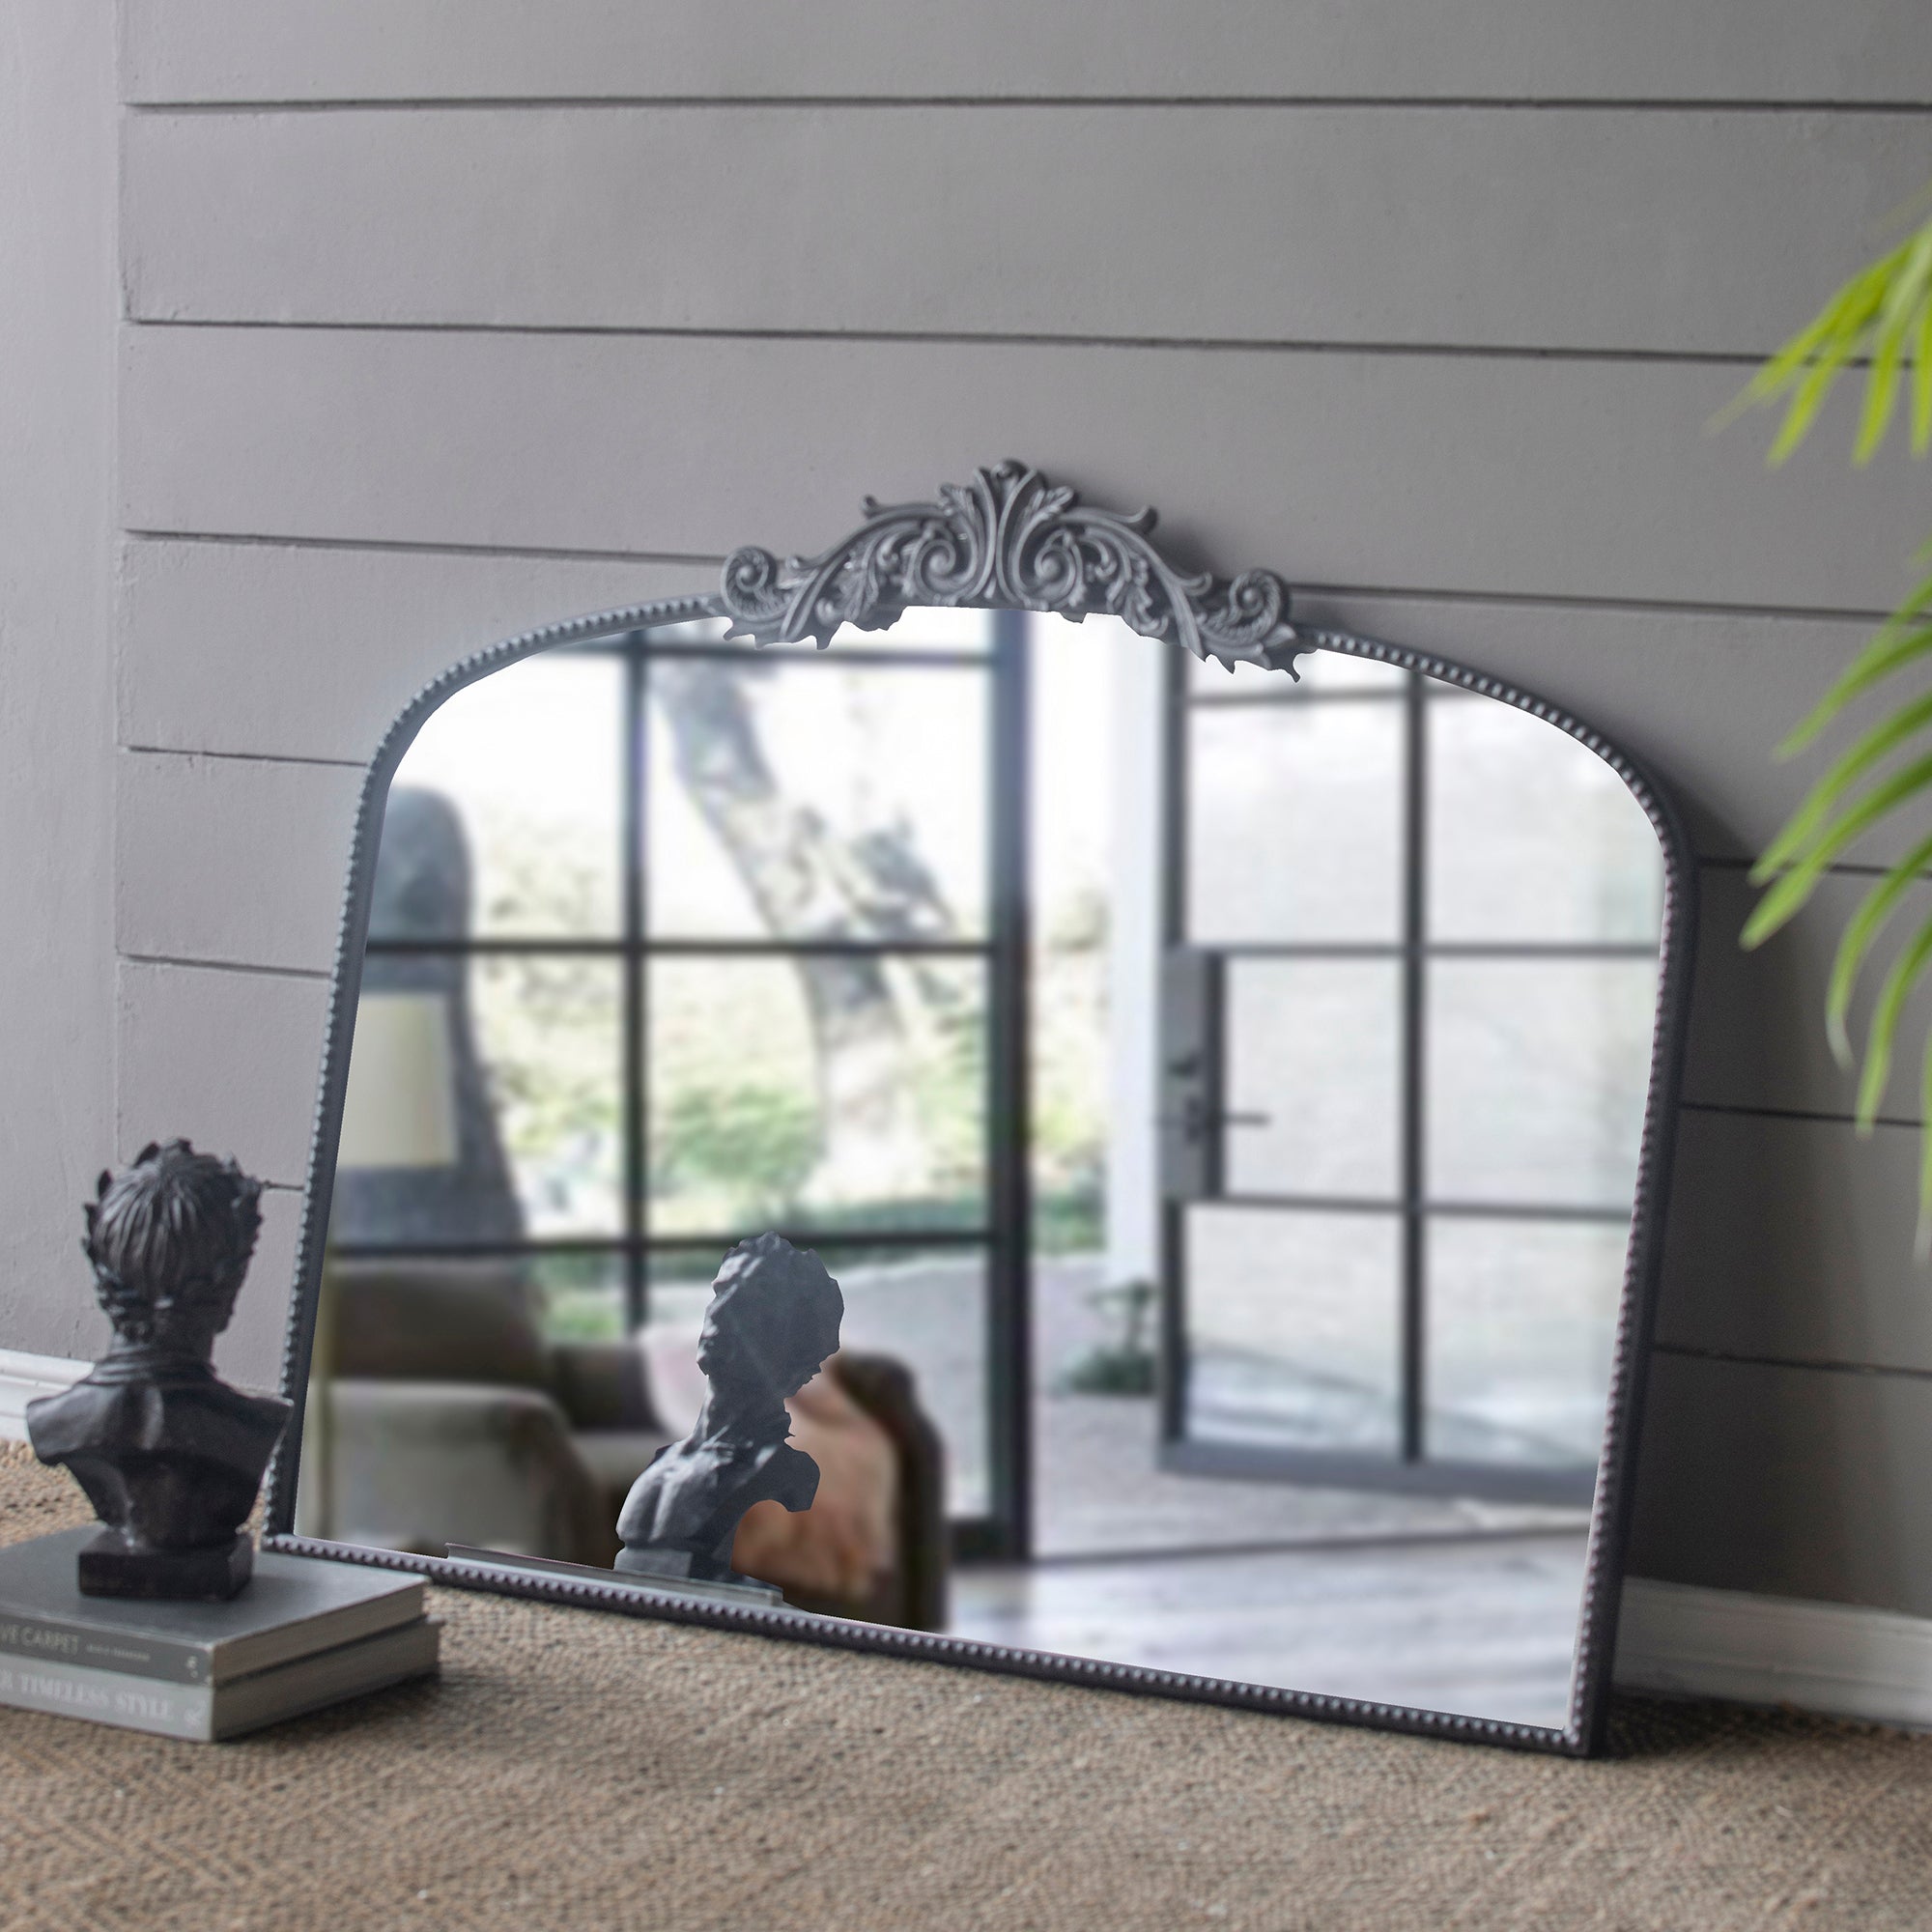 40" x 31" Classic Design Large Arch Mirror and Baroque black-glass